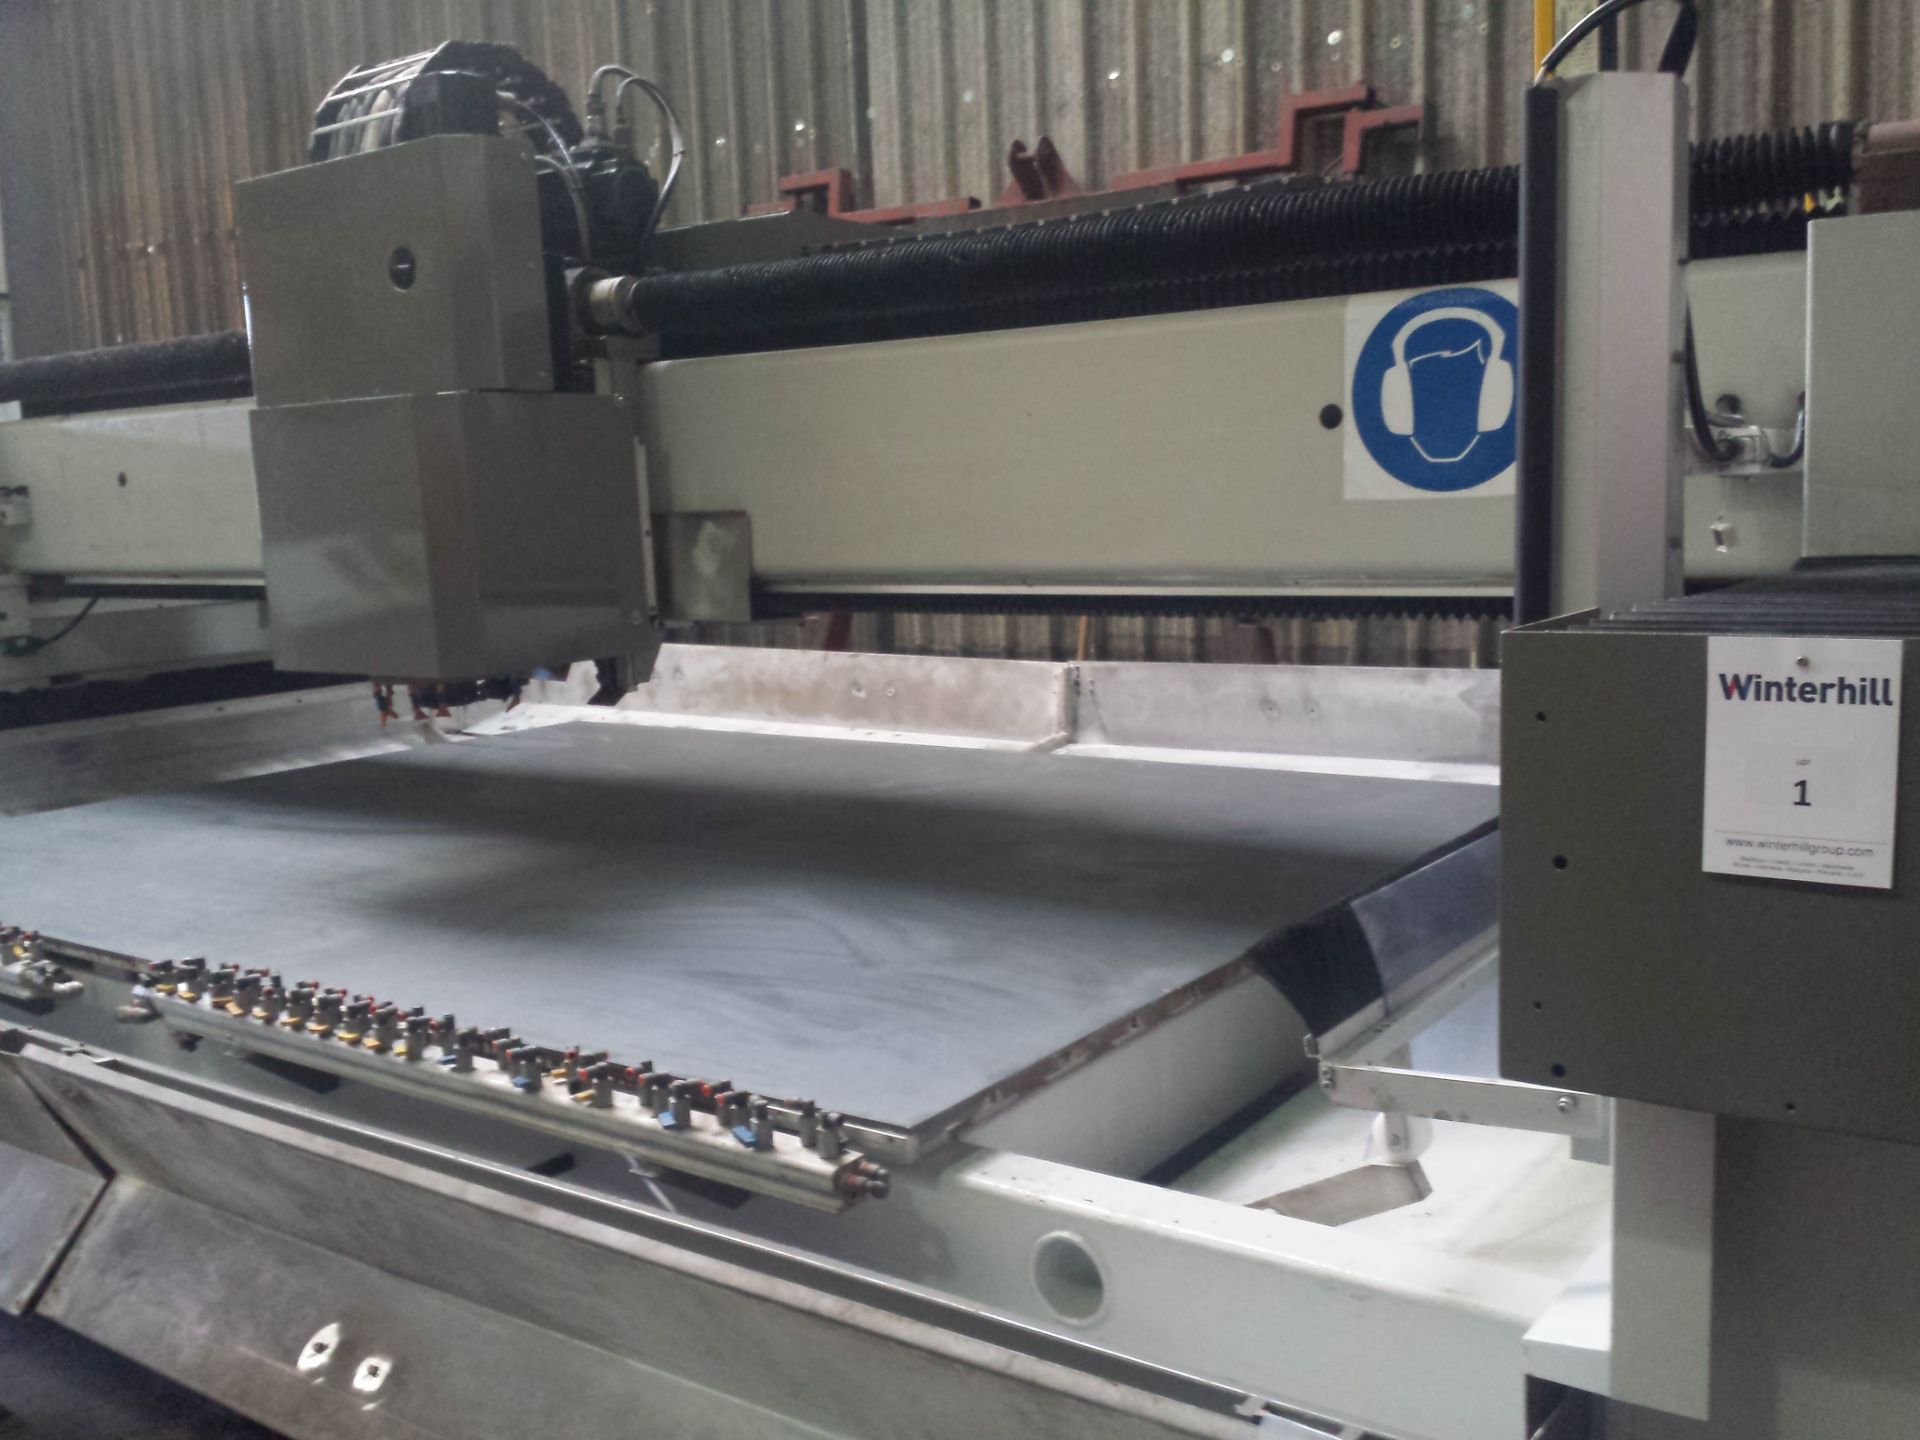 Intermac Master Edge 2300 CNC Edging Machine 3000 x 2300 Bed Size with S10 Numerical Control Unit,